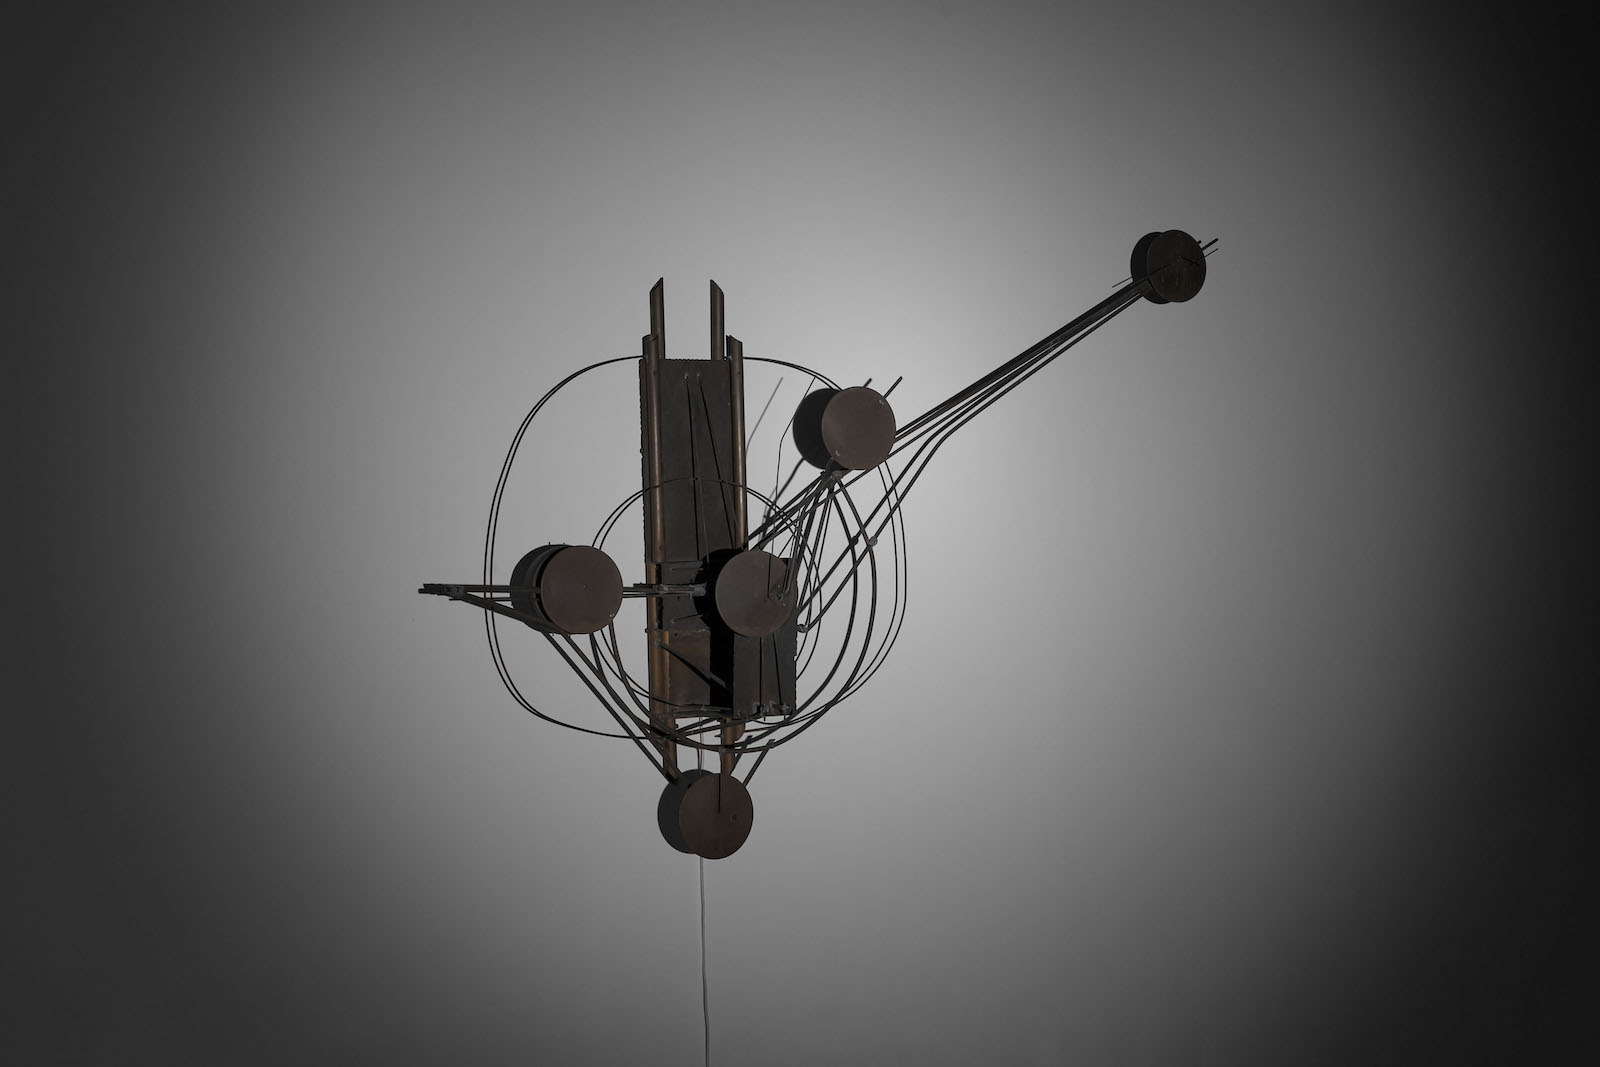 1974 kinetic wall sculpture by Christoph Bollinger